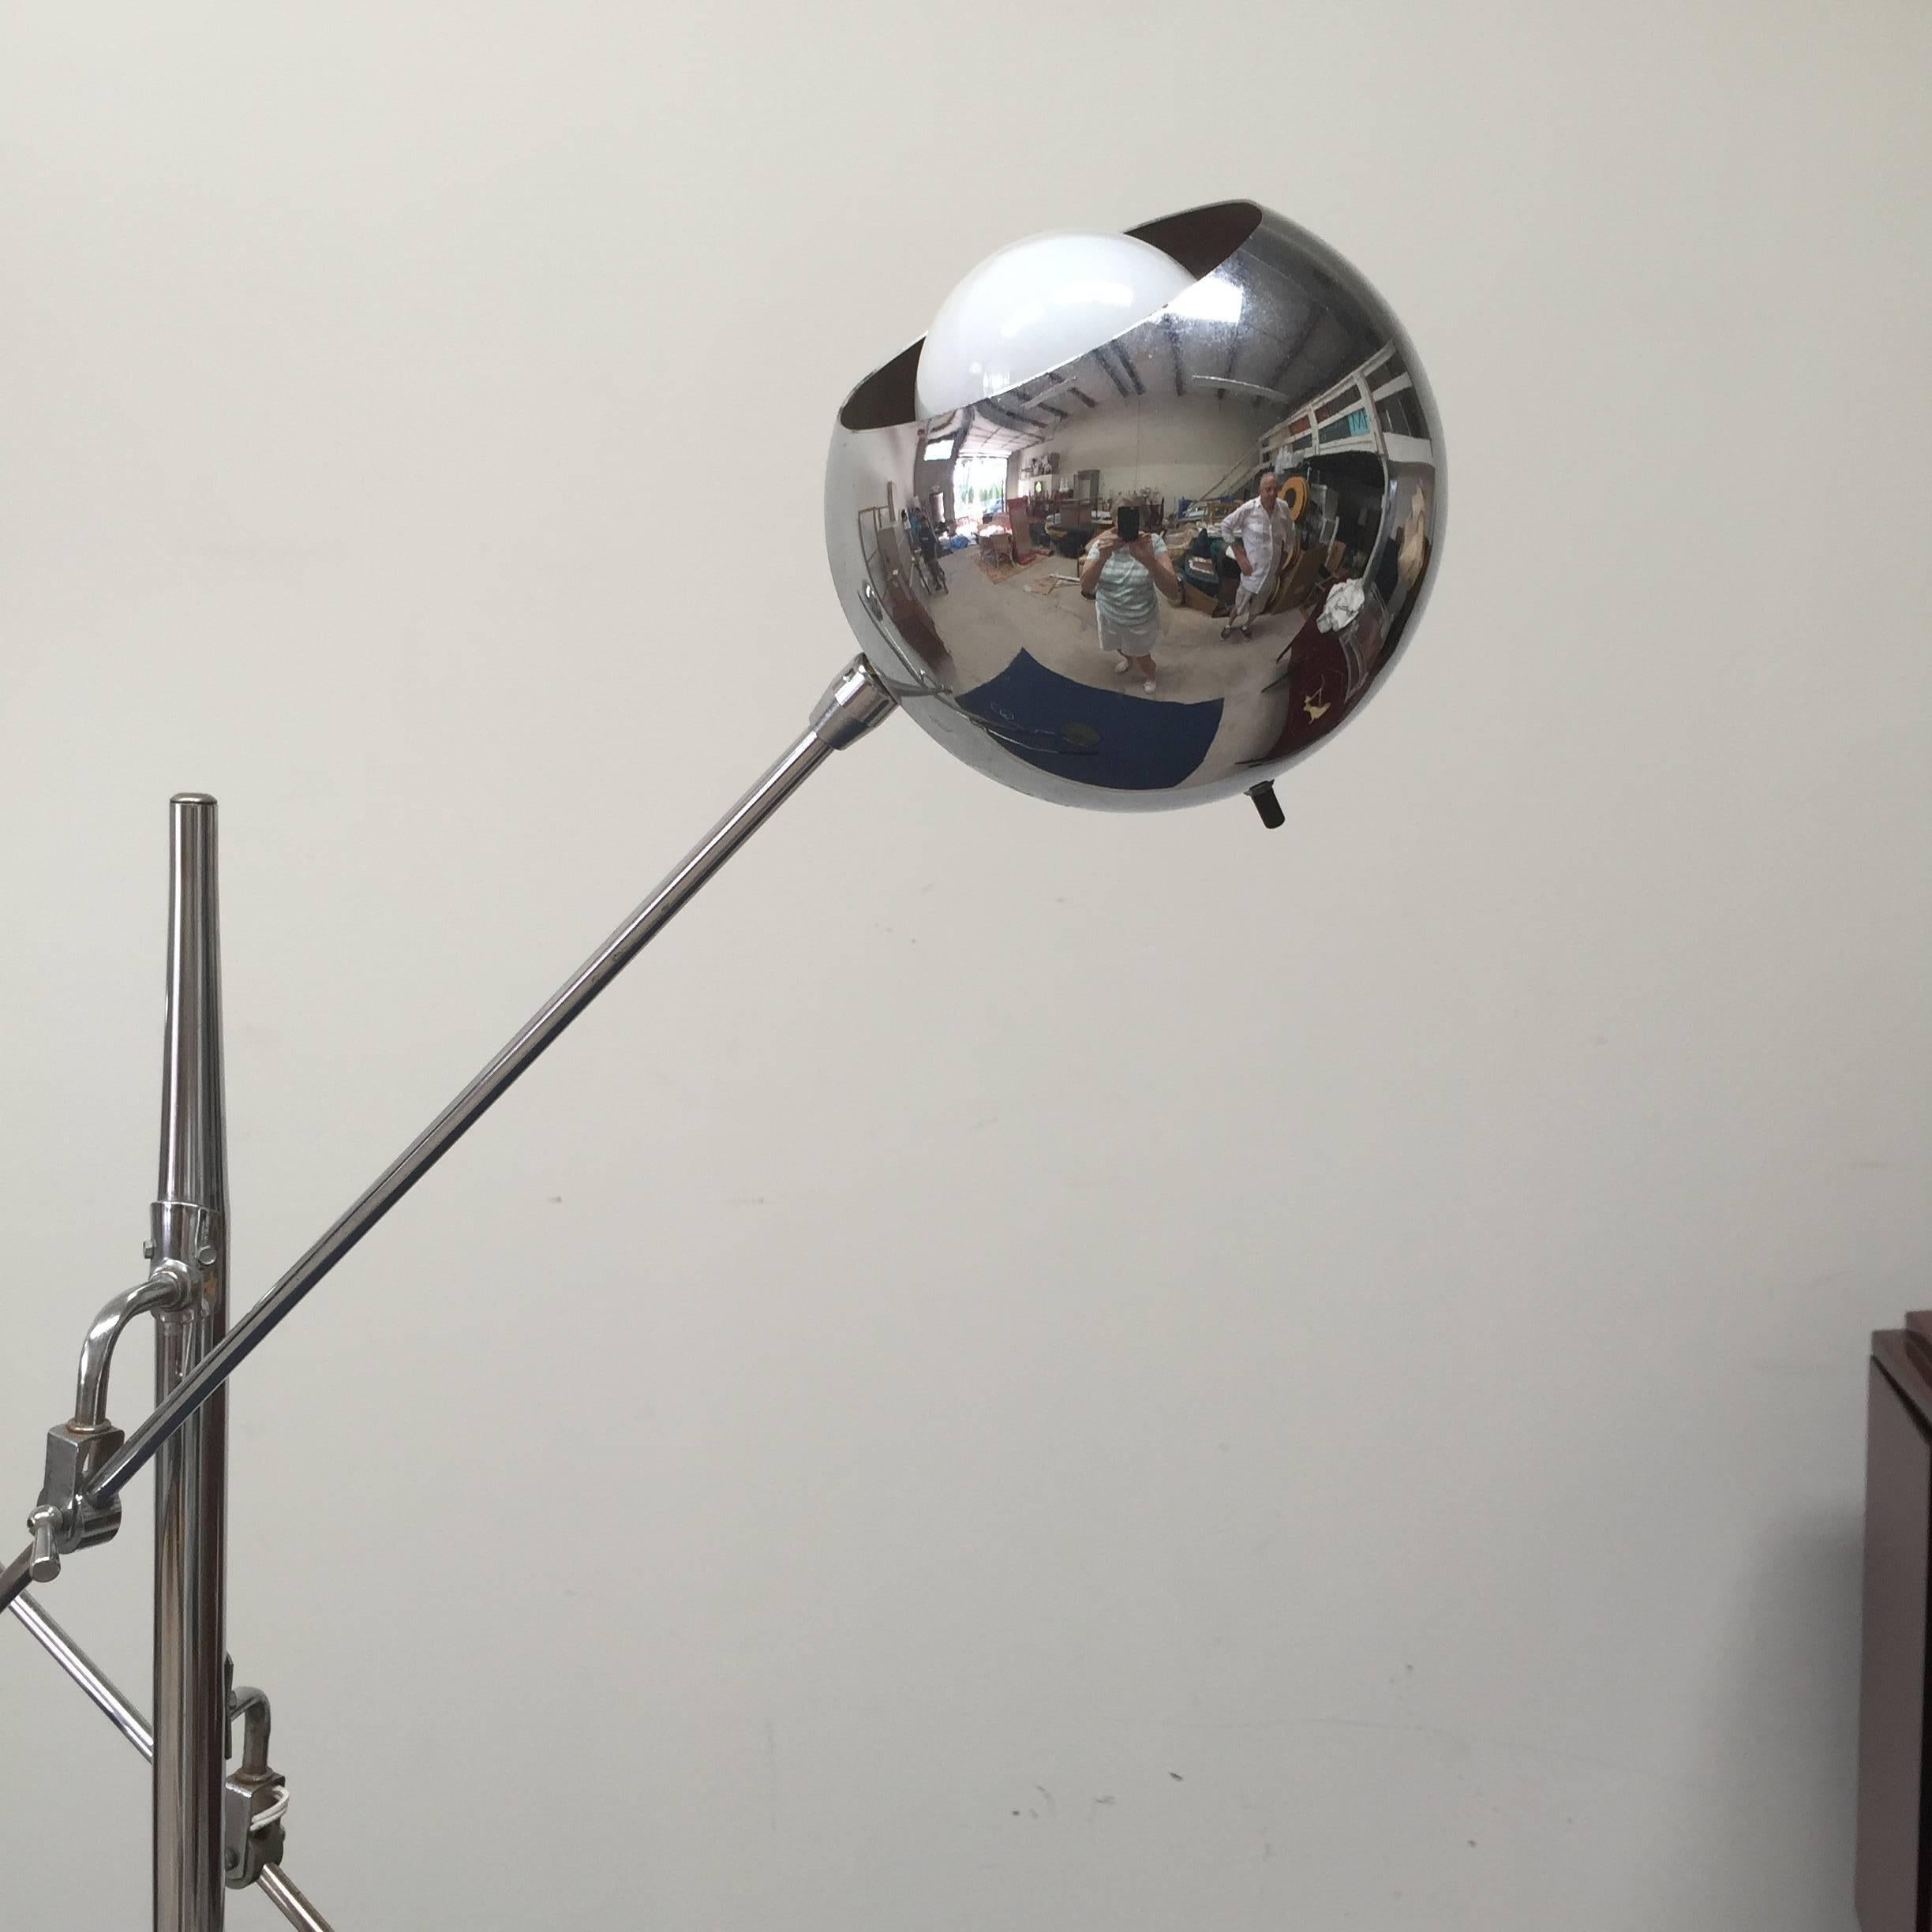 Classic double-armed chrome orbiter tripod floor lamp. Excellent vintage condition, original cord with fully adjustable and articulating heads. Chrome is free from pitting or peeling.